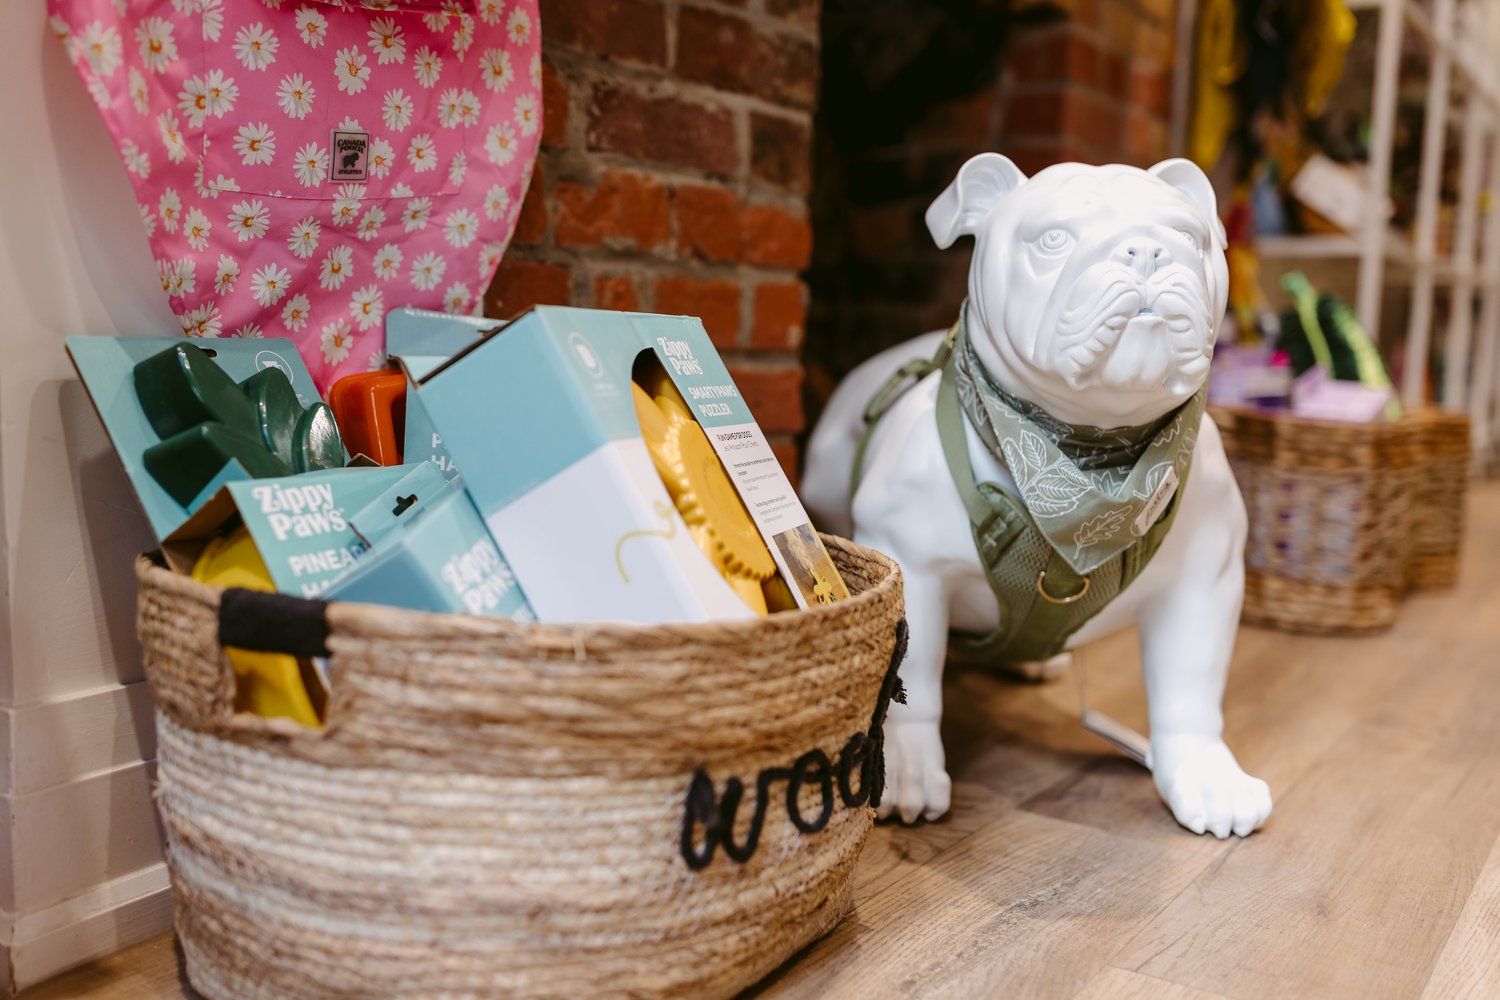 Gifts ideas from Dog World Resort and Spa in Downtown Toronto